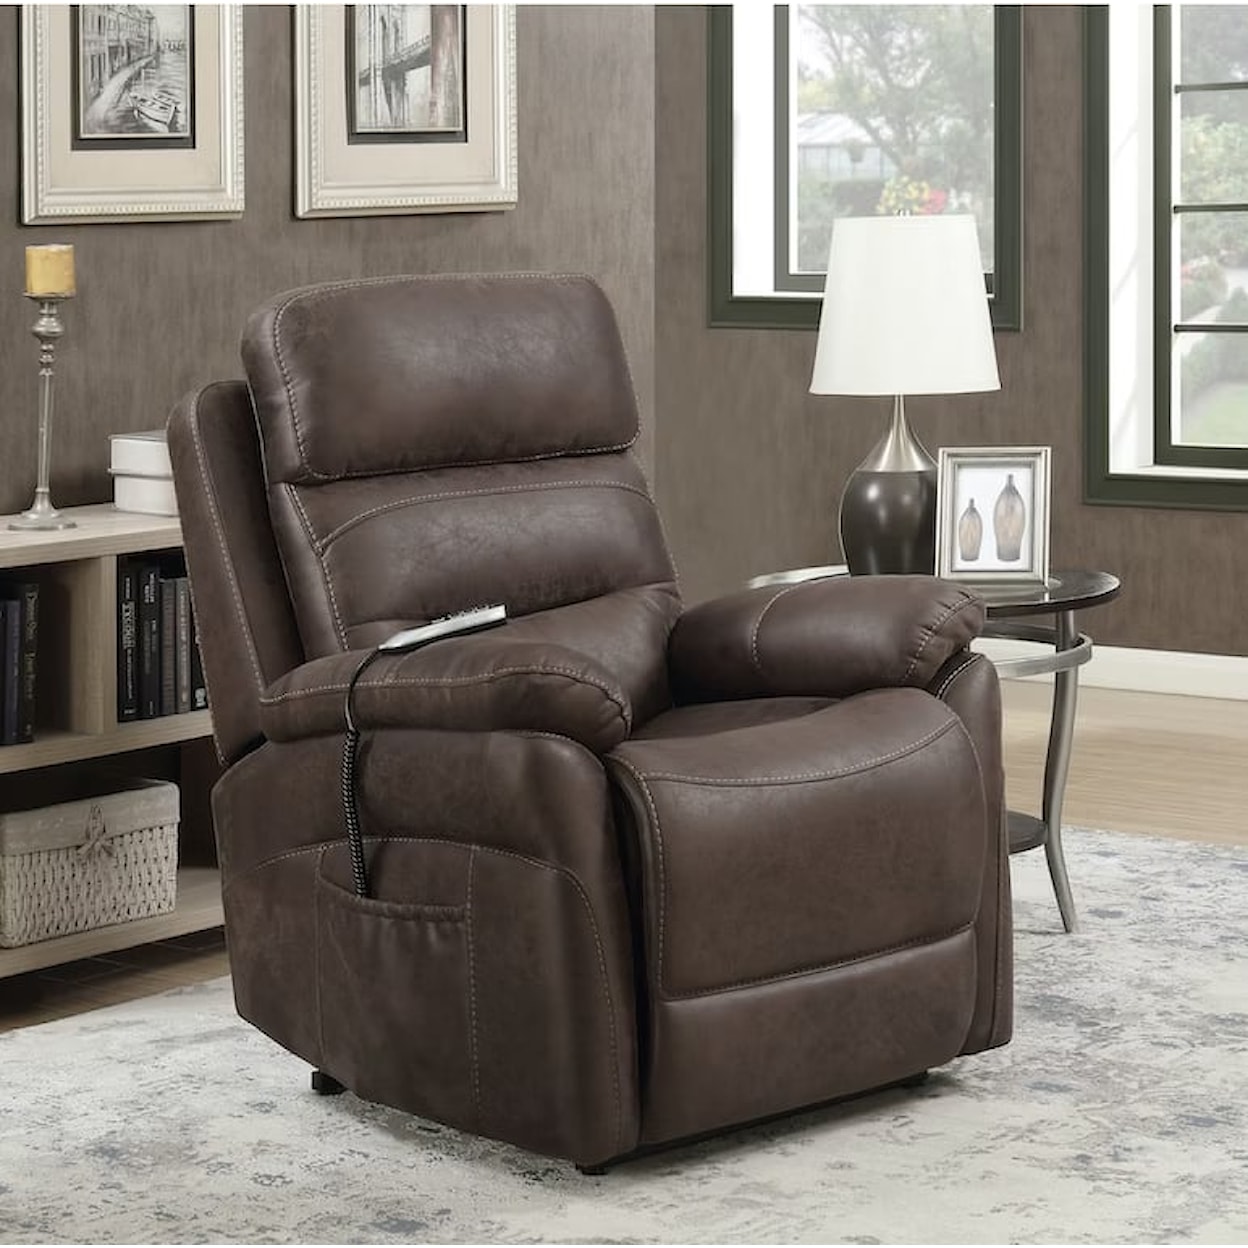 Prime Resources International Dalton Power Lift Chair in Whiskey